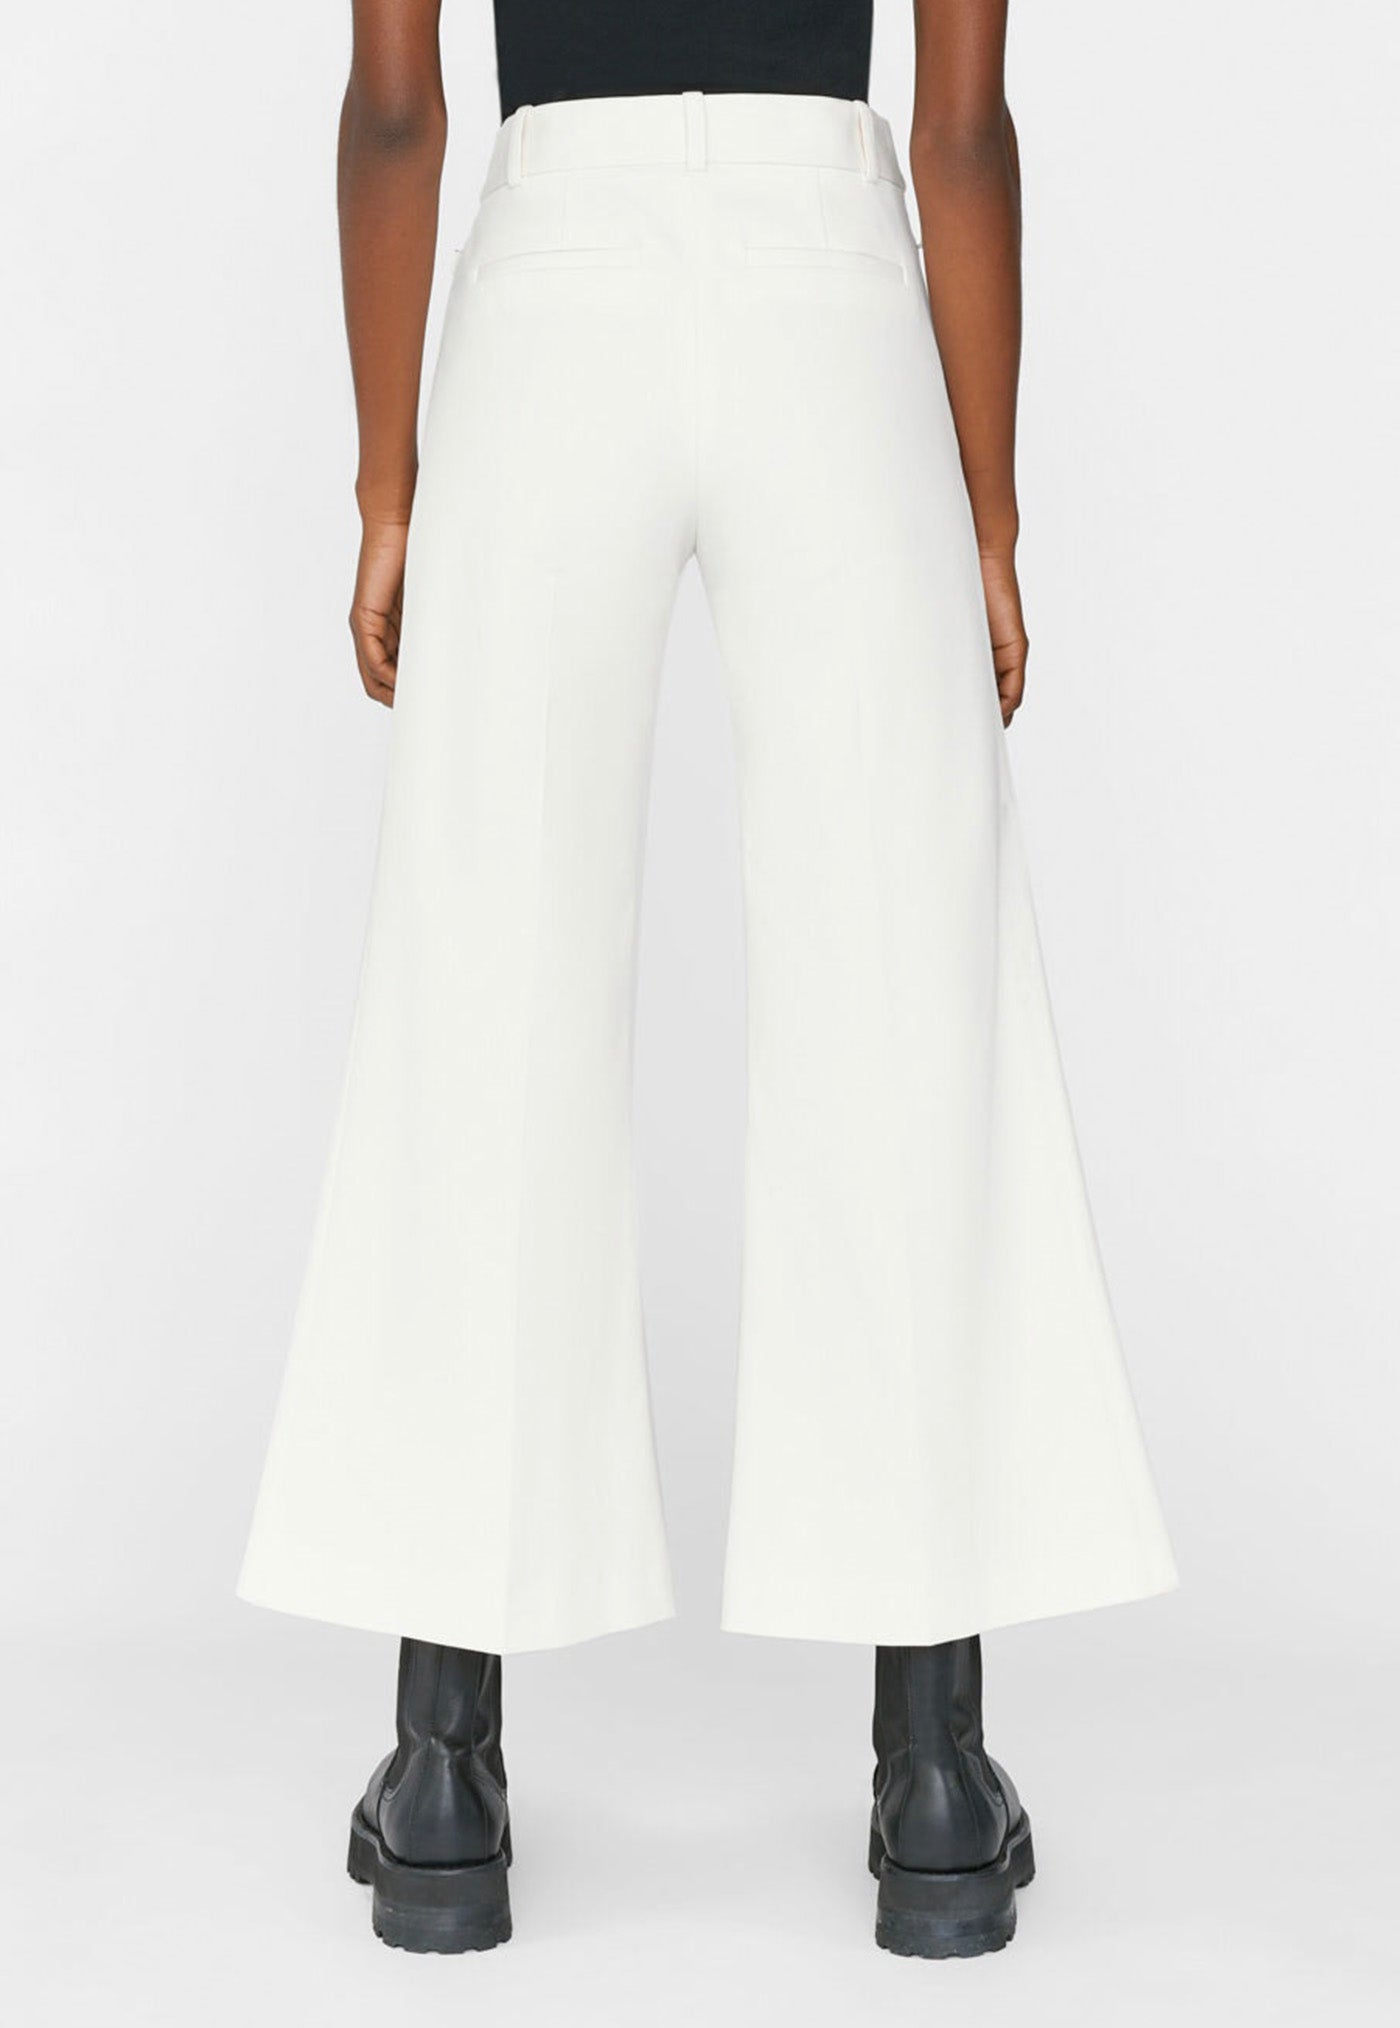 Le Crop Palazzo Trouser - Bone sold by Angel Divine